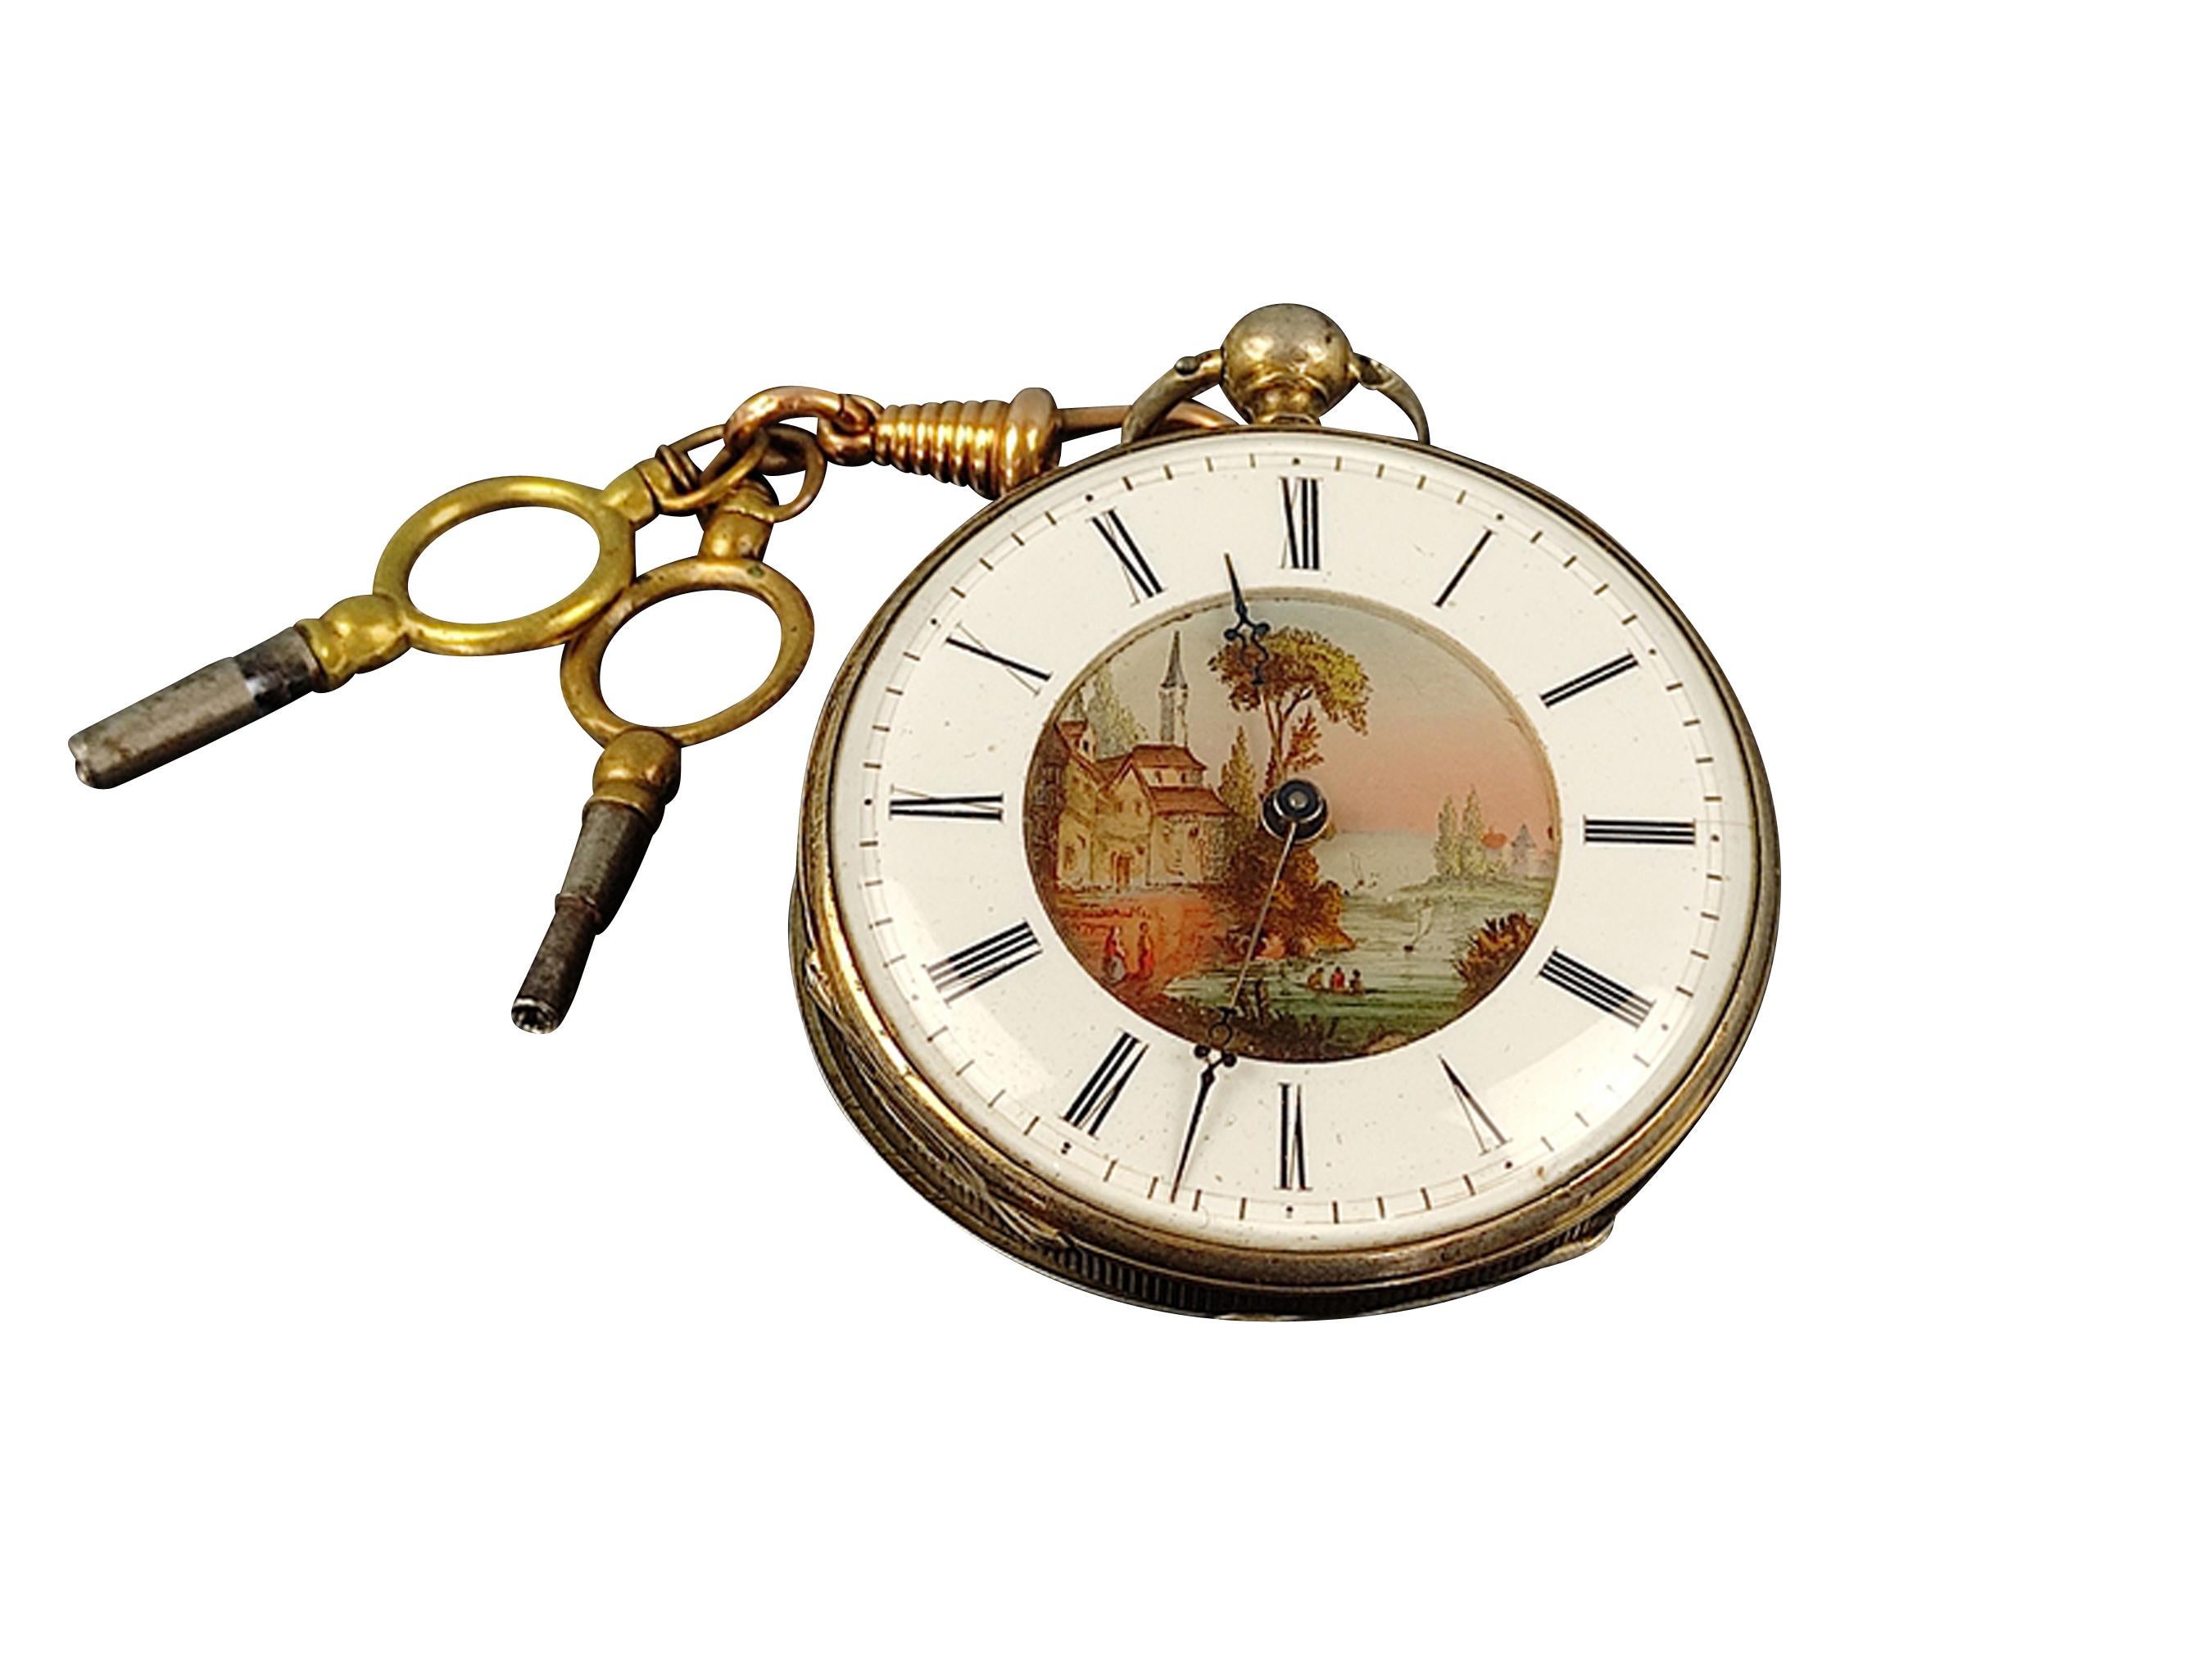 Rare Antique Pocket Key Watch French 1800s with Painted Enamel Dial For Sale 5